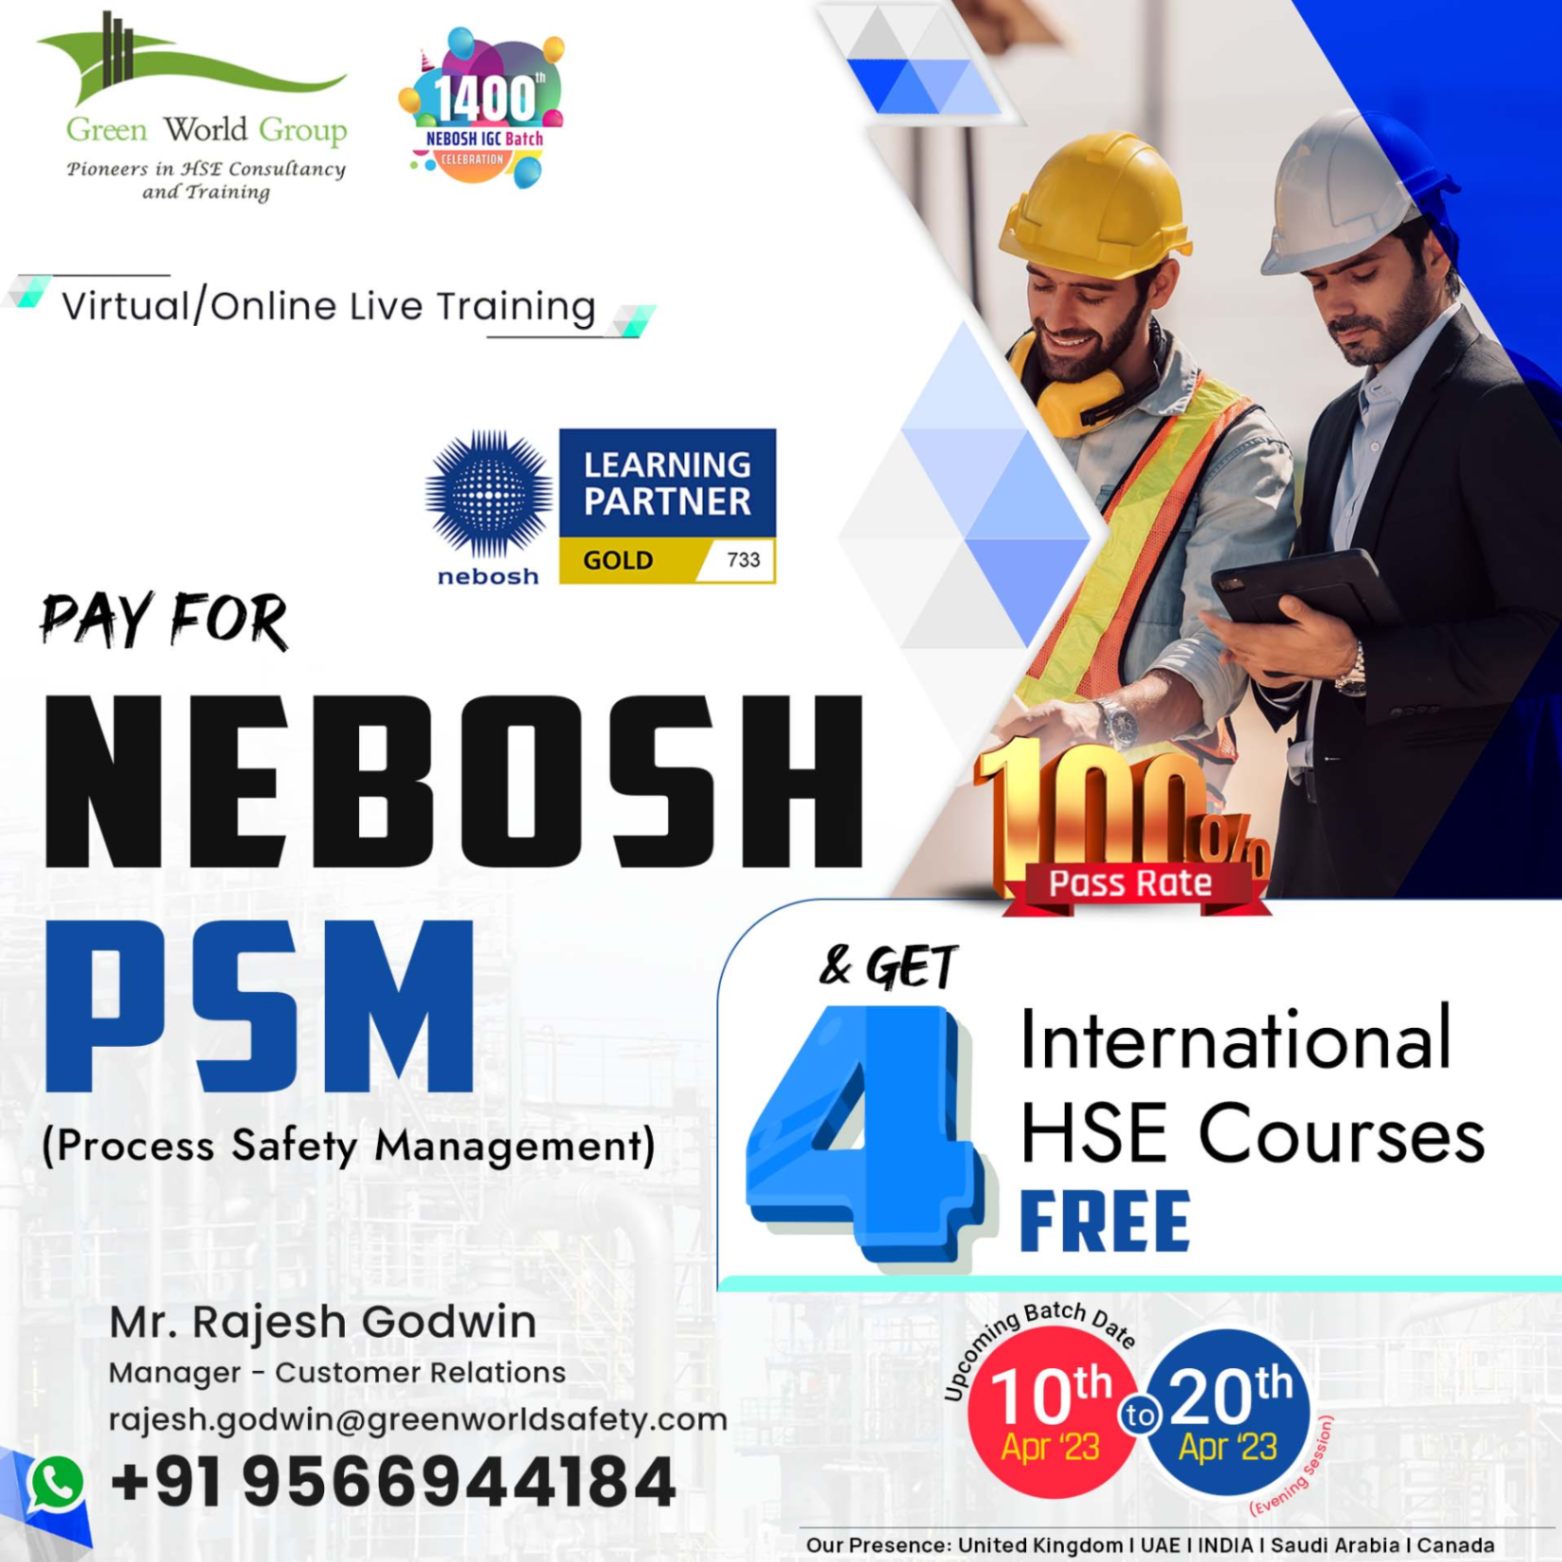 Boost your career opportunities with NEBOSH PSM!